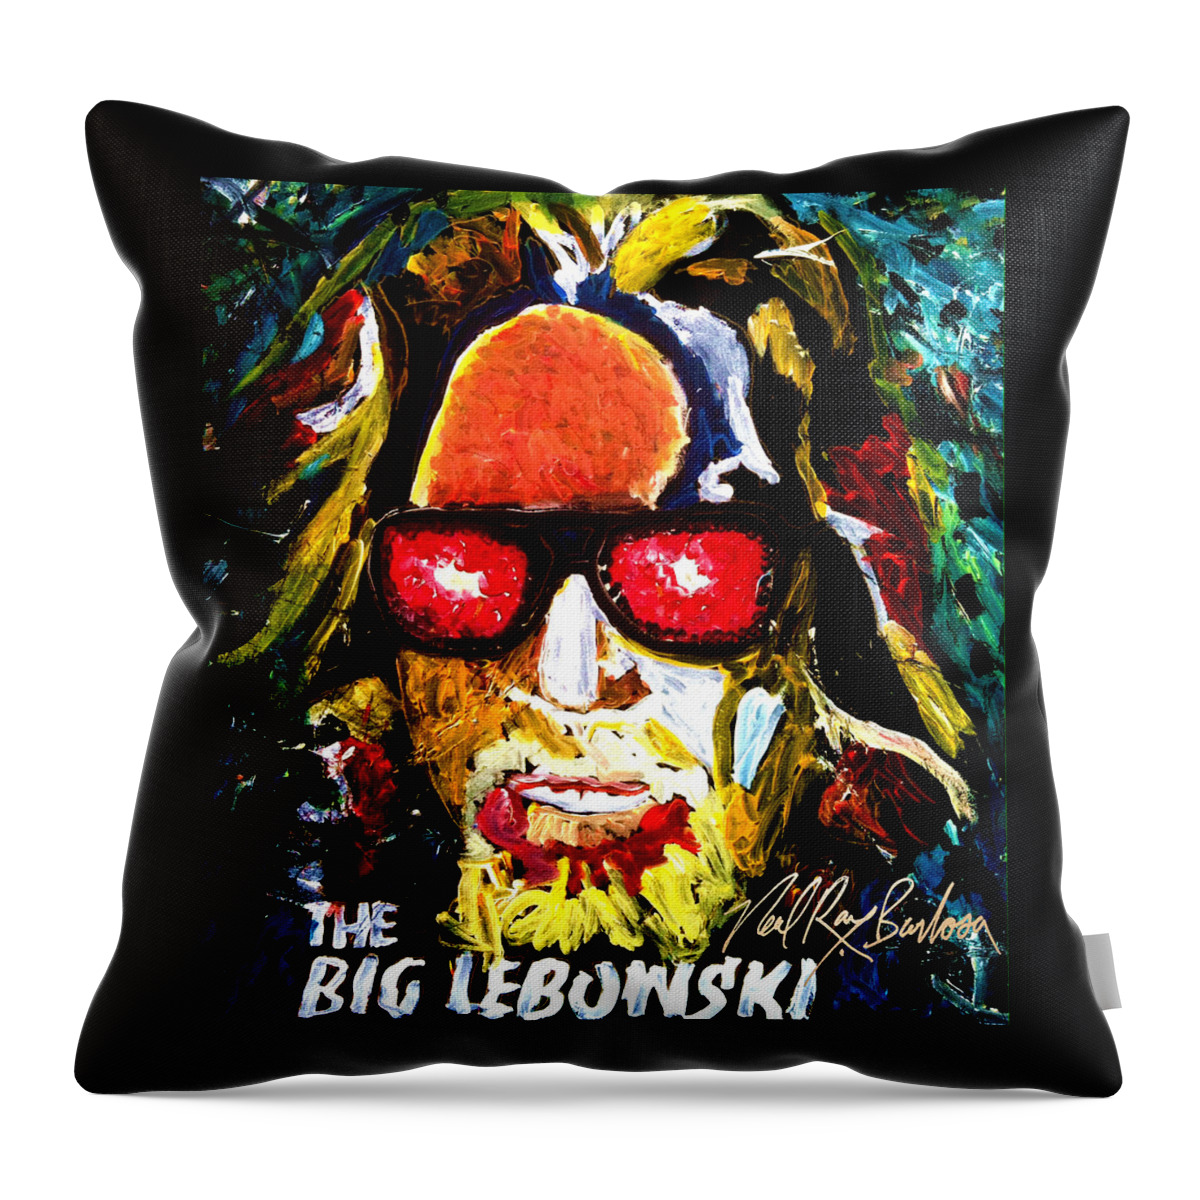 The Big Lebowski Throw Pillow featuring the painting tribute to THE BIG LEBOWSKI by Neal Barbosa